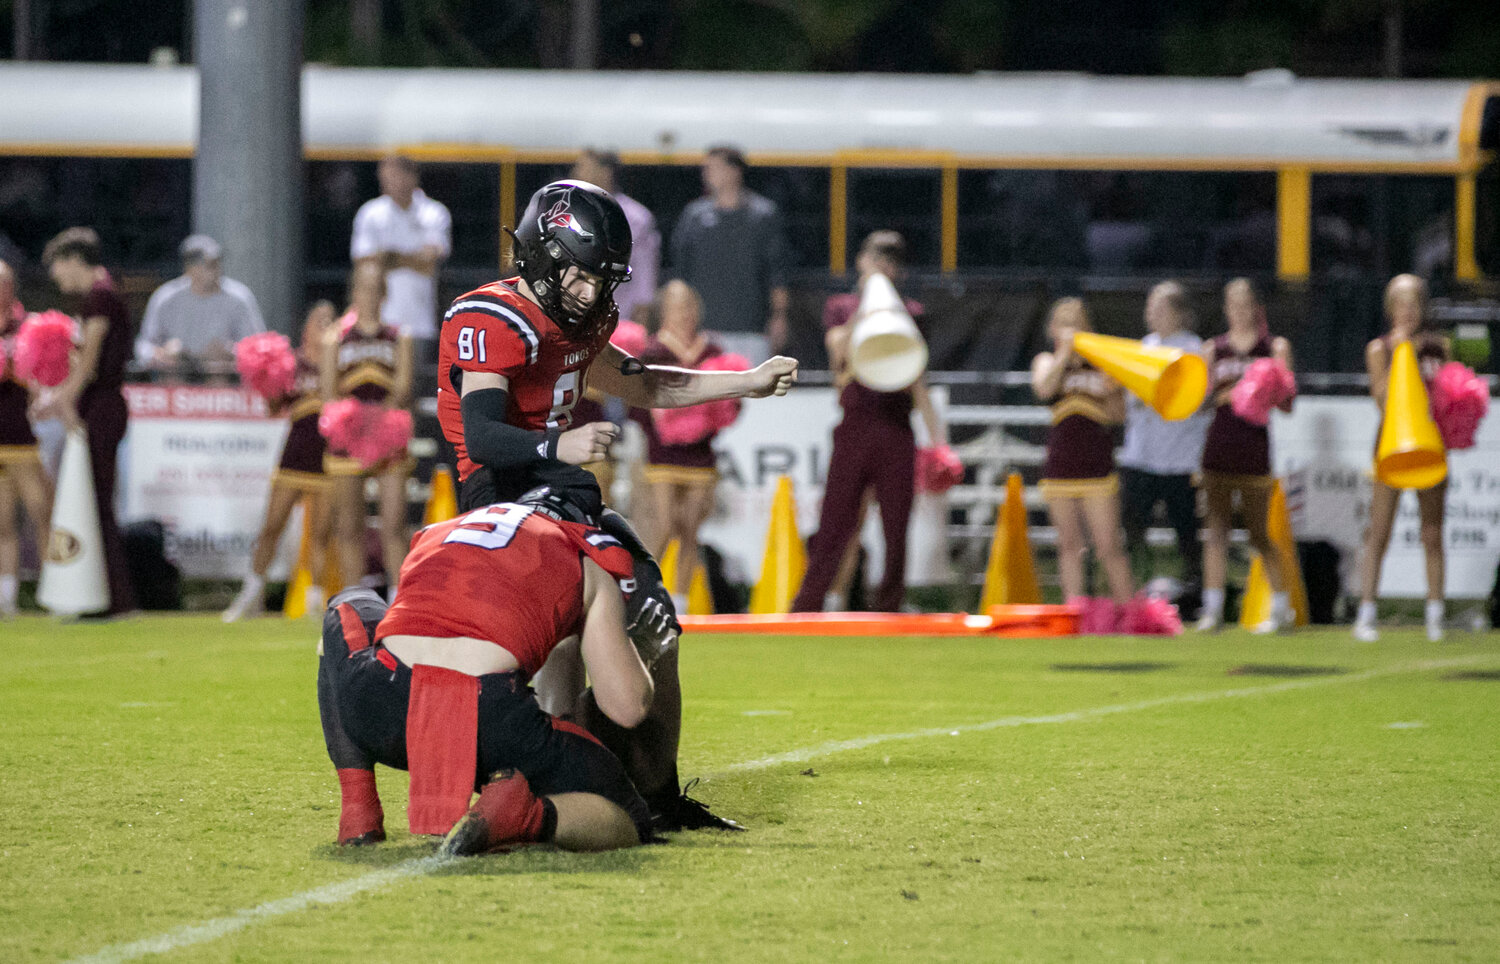 Spanish Fort junior kicker Cameron Lytle converts one of his seven points-after tries of the game on Friday, Oct. 20, during the Toros’ home region tilt with the Robertsdale Golden Bears. Lytle added a 42-yard field goal to help the hosts earn a 45-0 victory.